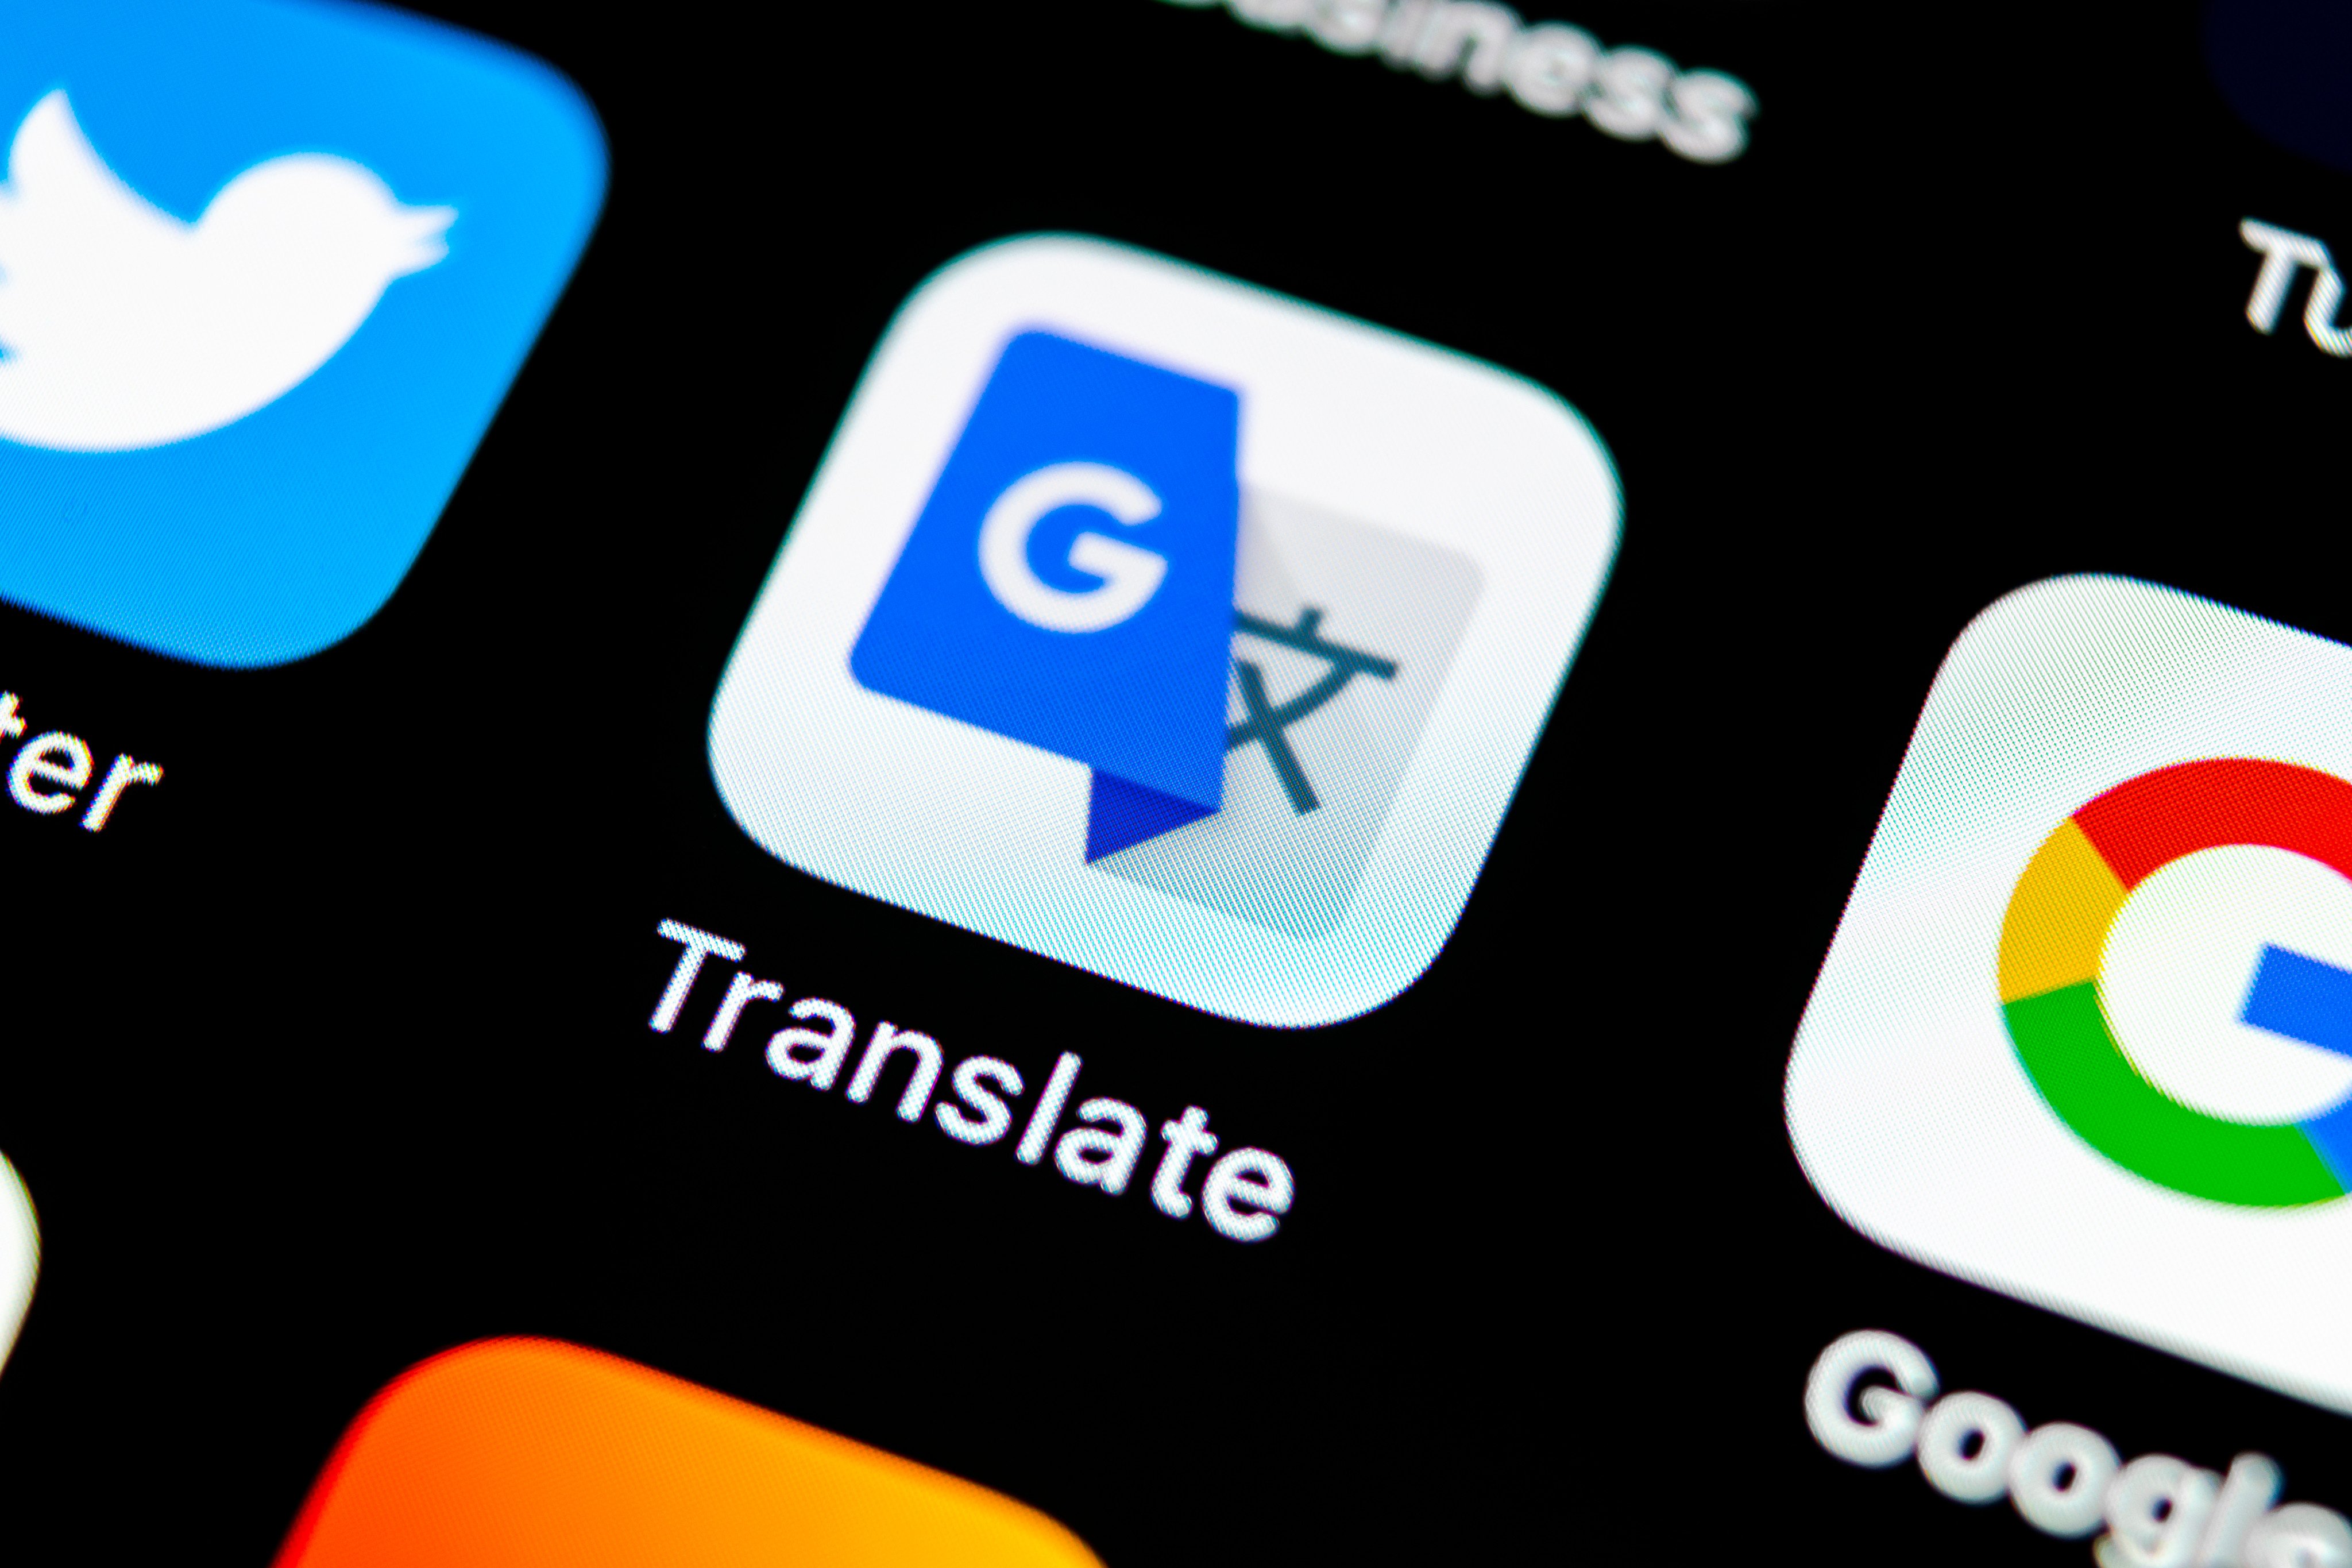 The Google Translate app’s Chinese website recorded 53.5 million visits from desktop and mobile users combined in August, according to data from Similarweb. Photo: Shutterstock